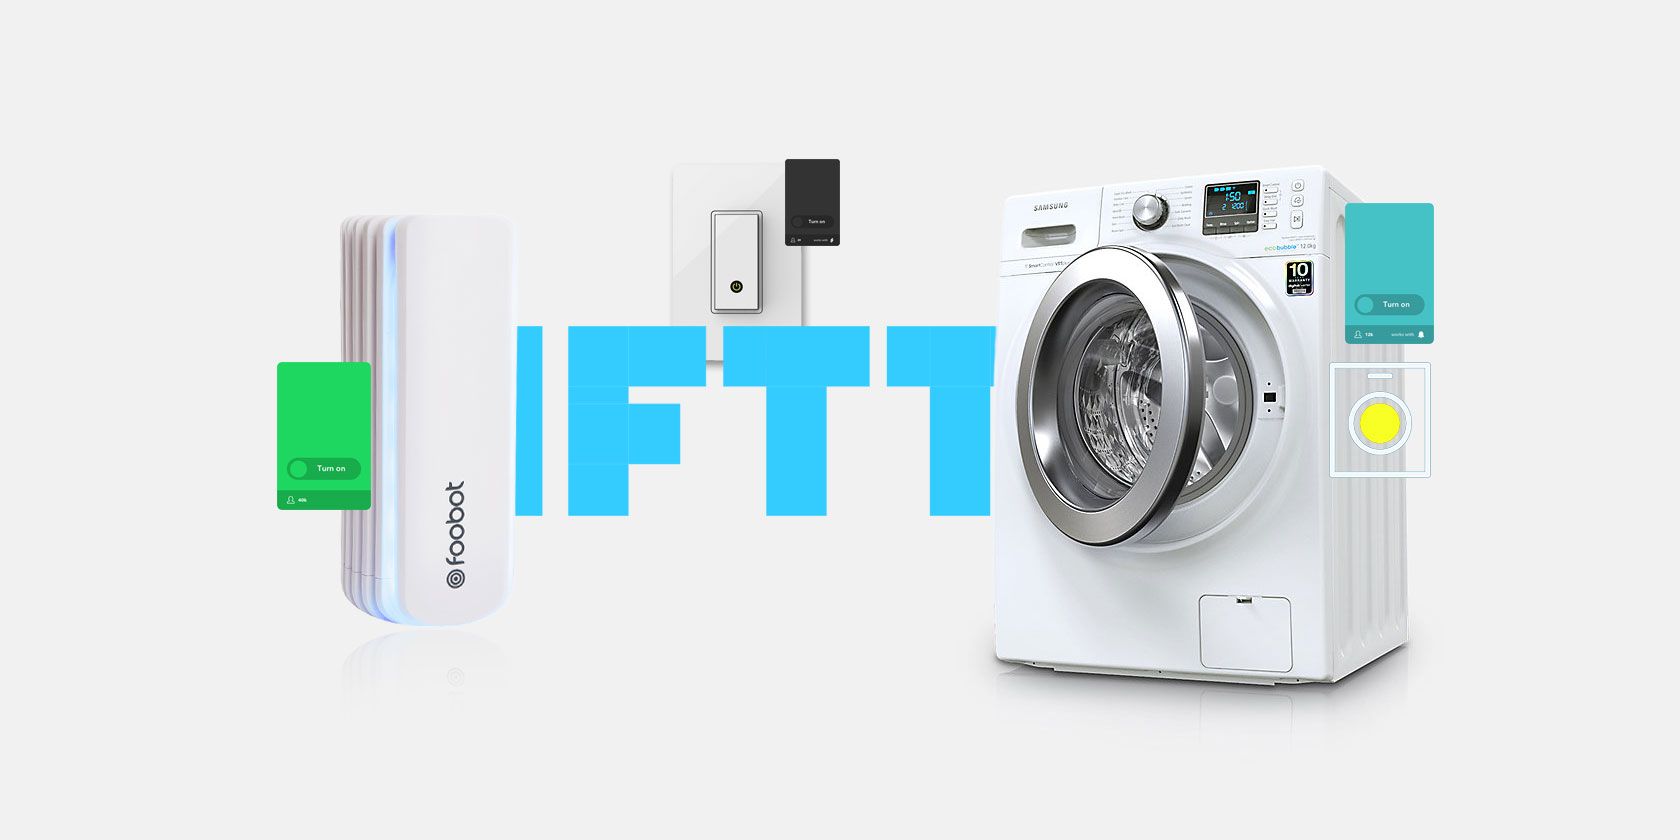 10 of the Best IFTTT Recipes for Smart Home Automation